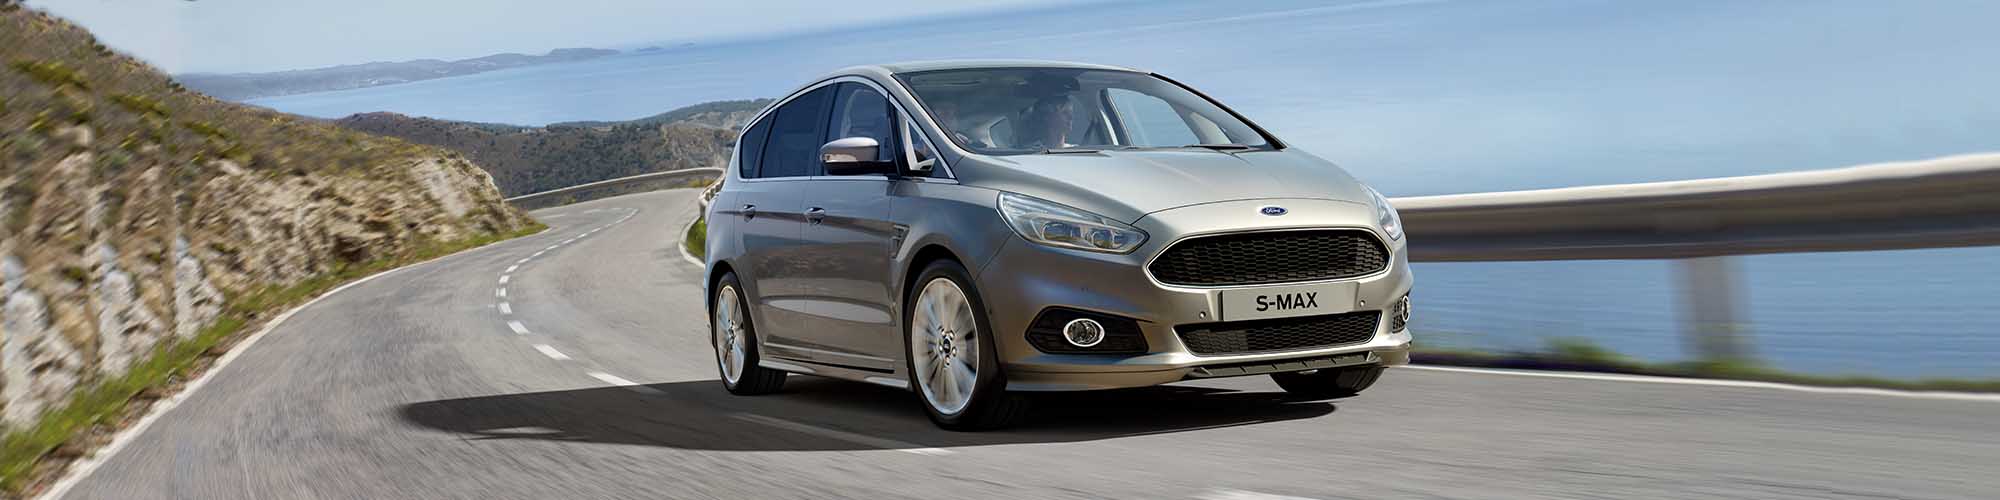 New Ford S-MAX versions